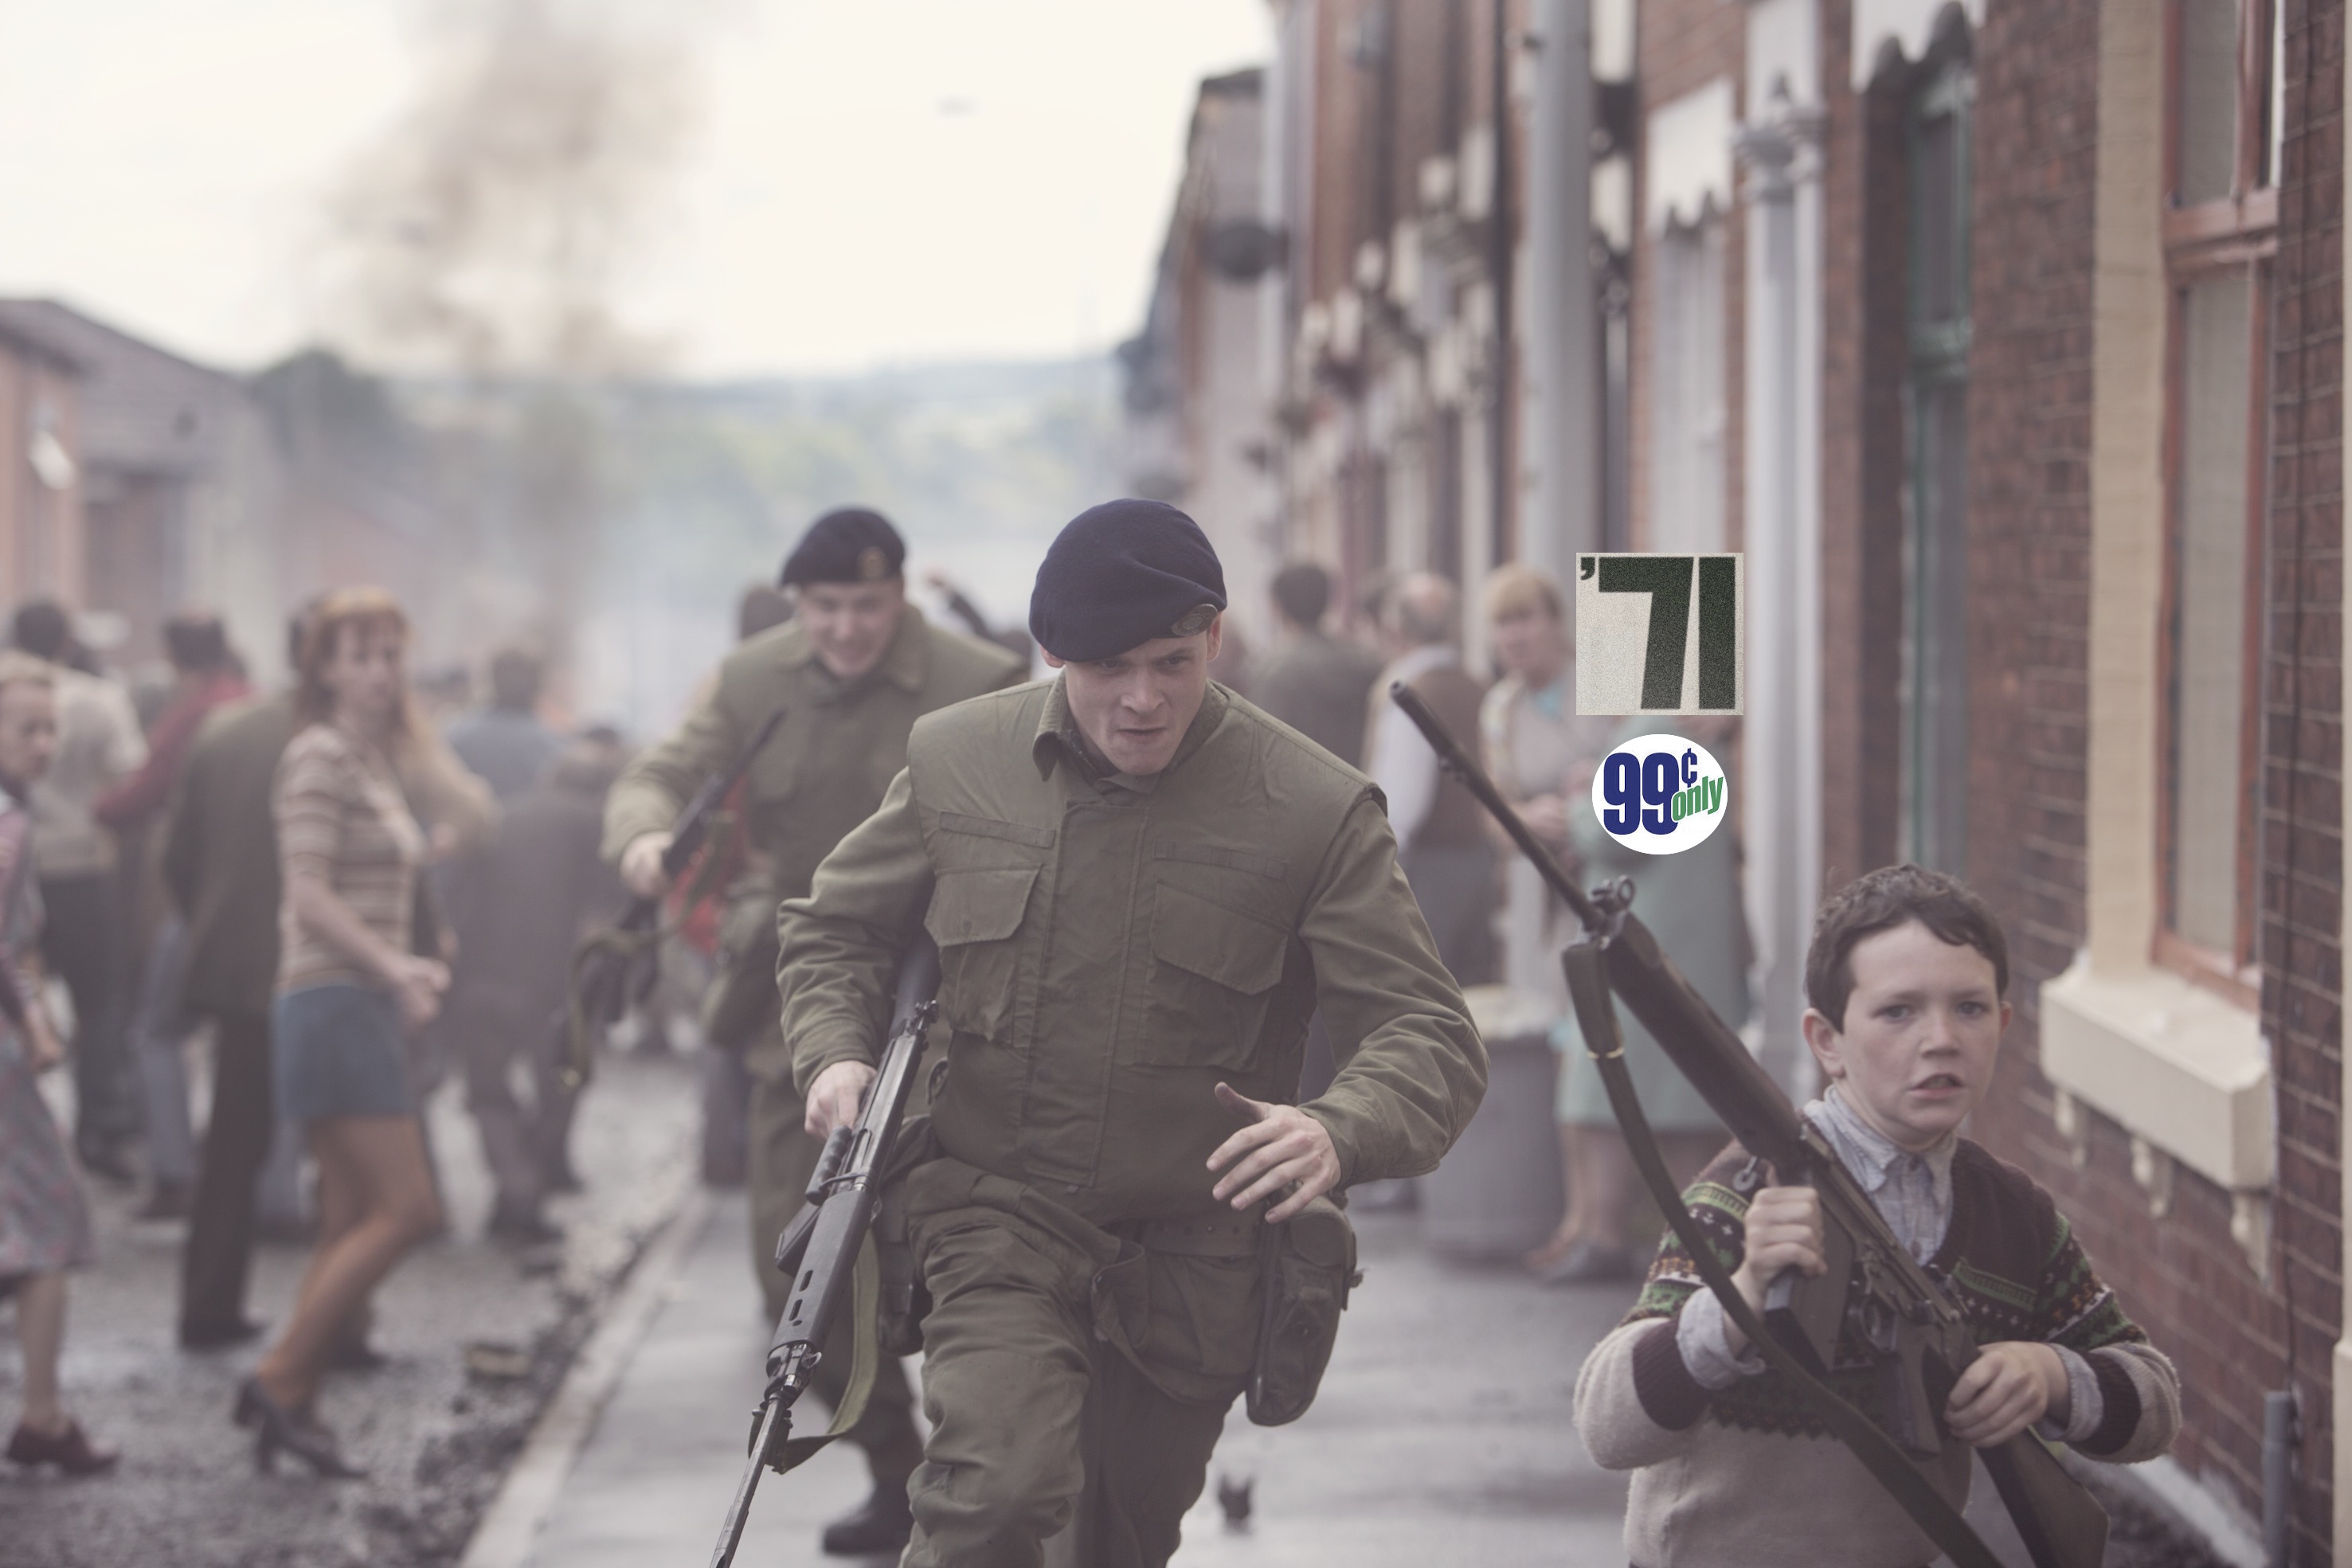 '71, jack o'connell, itunes 99 cent movie rental